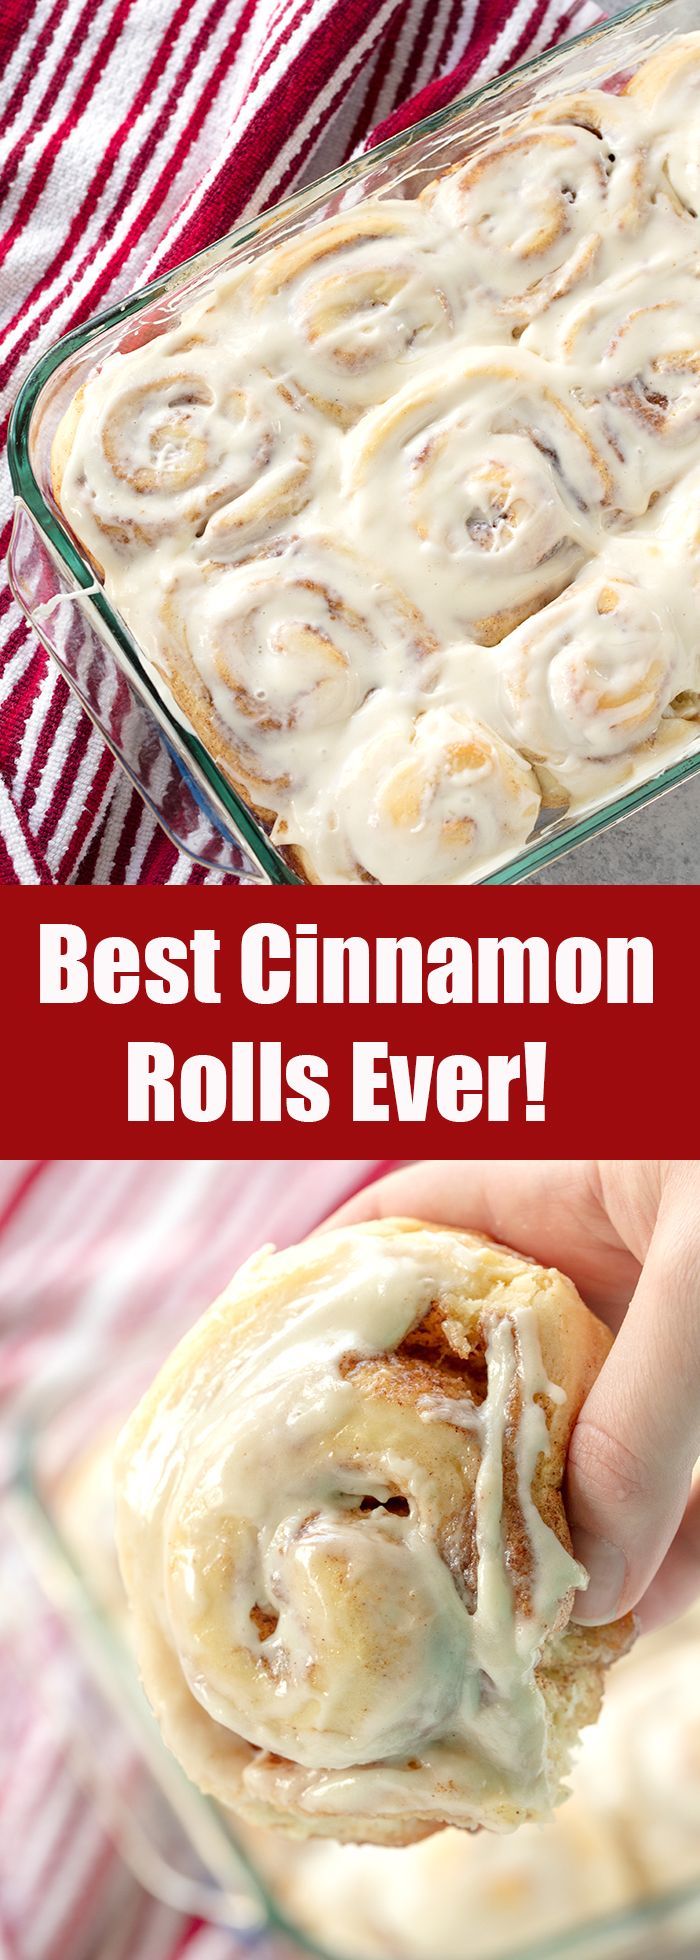 This recipe is hands down the Best Homemade Cinnamon Rolls Ever. The perfect soft, fluffy, gooey cinnamon rolls are right at your